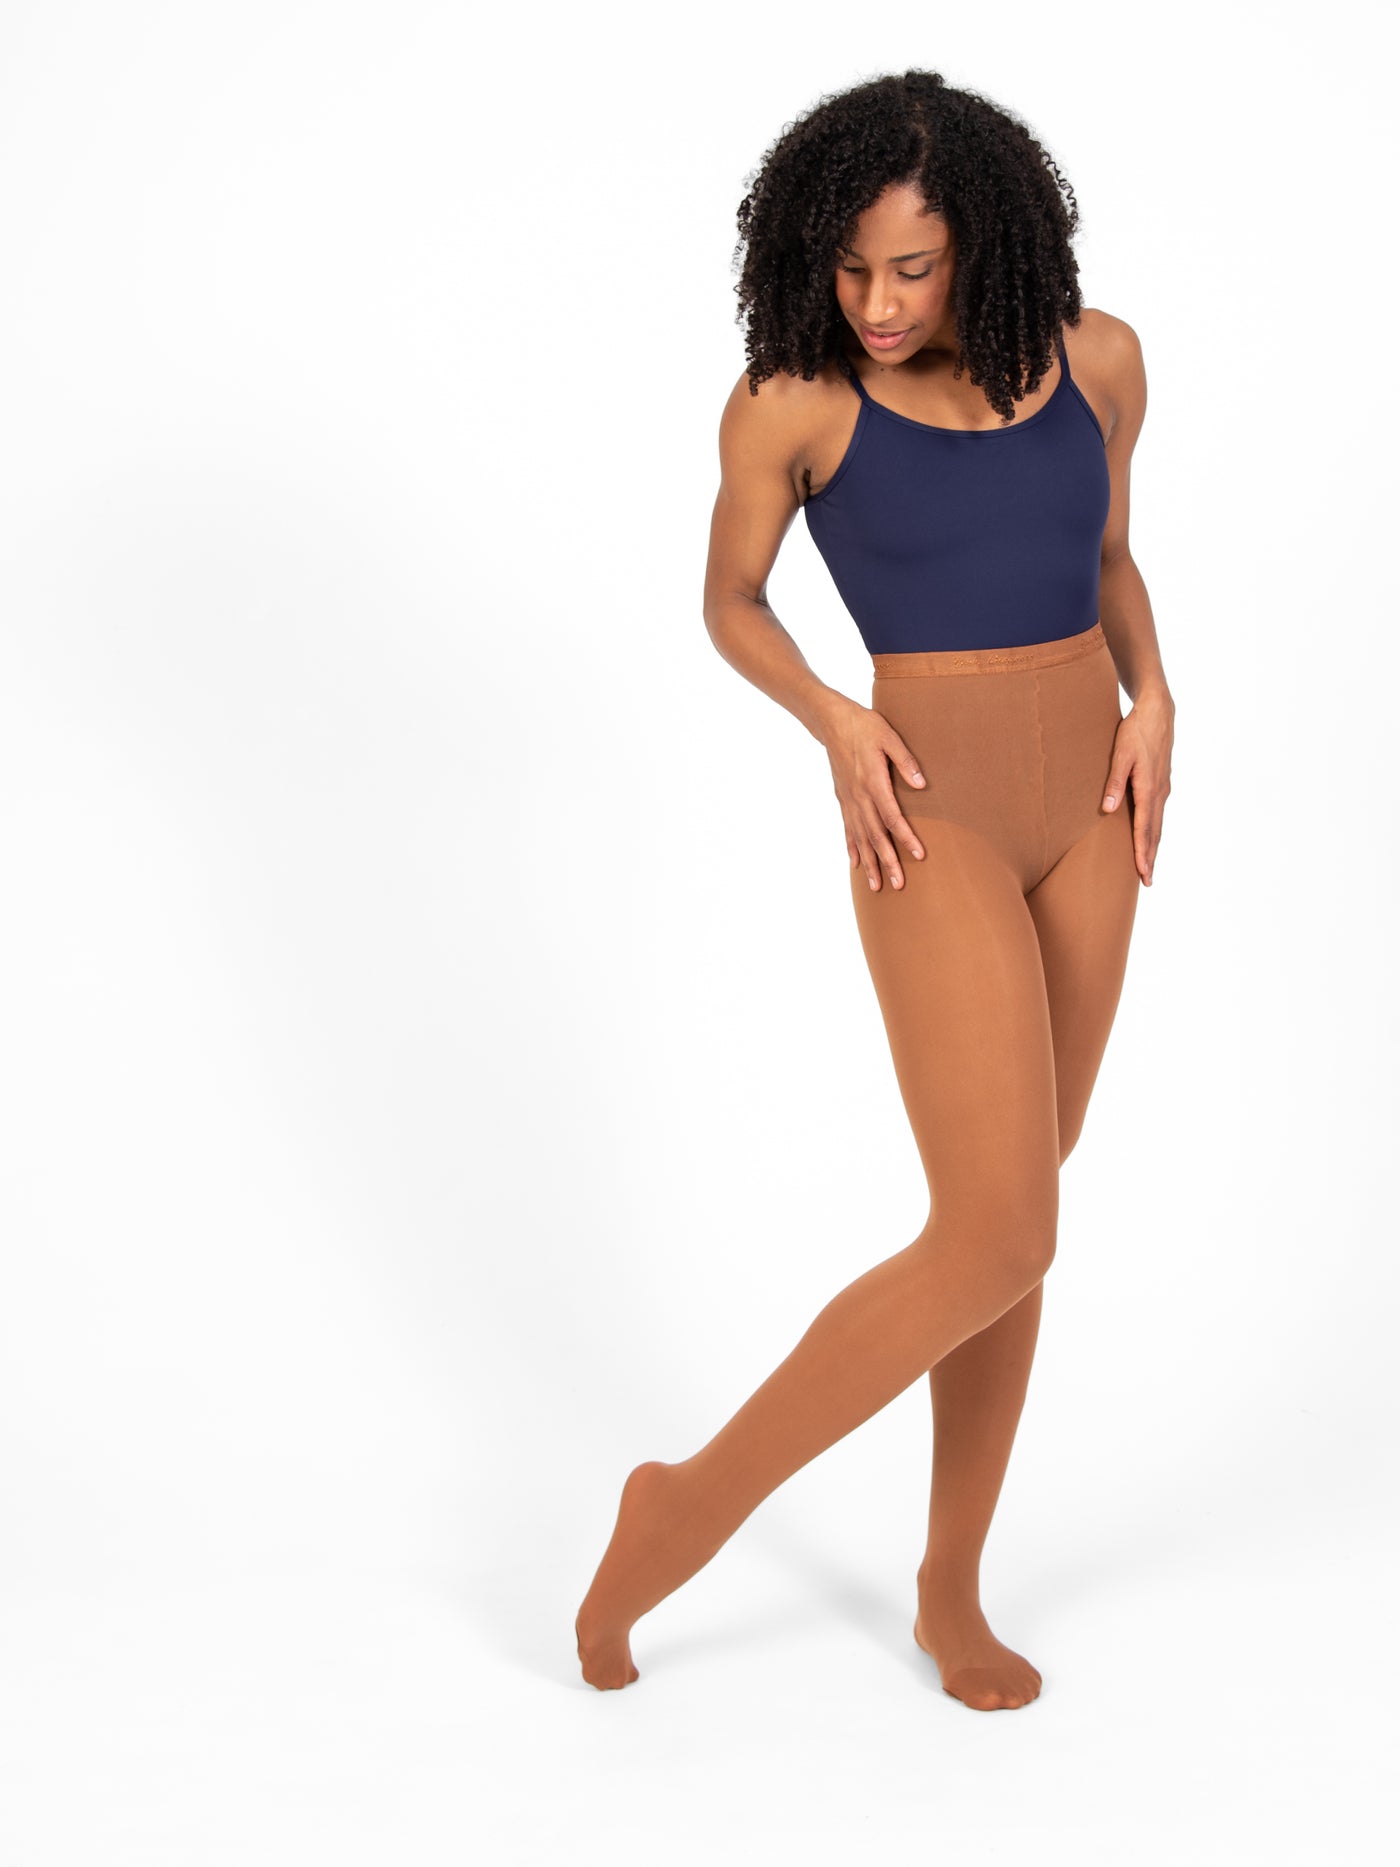 Body Wrapper Full body tights? Are they Supportive? : r/BALLET